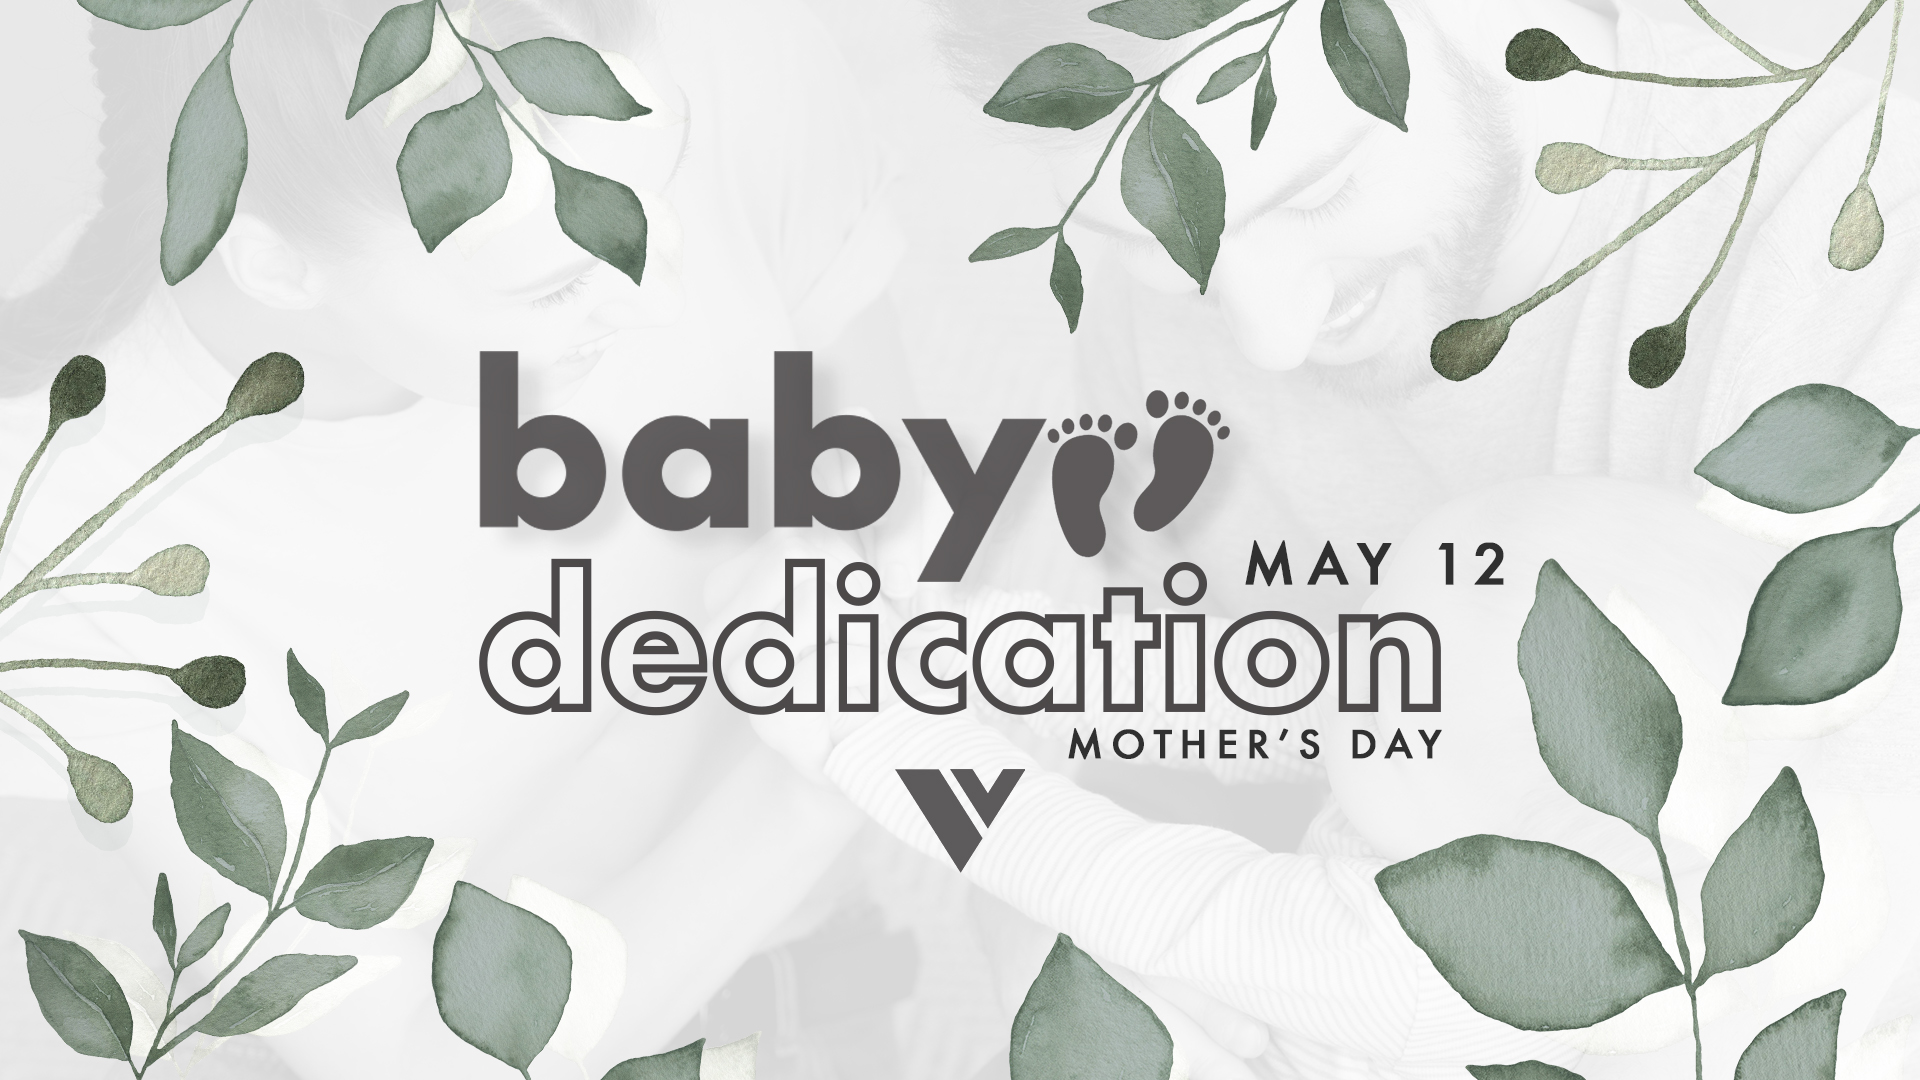 Last Chance to Register for Baby Dedication Sunday - May 12 (Mother's Day)!